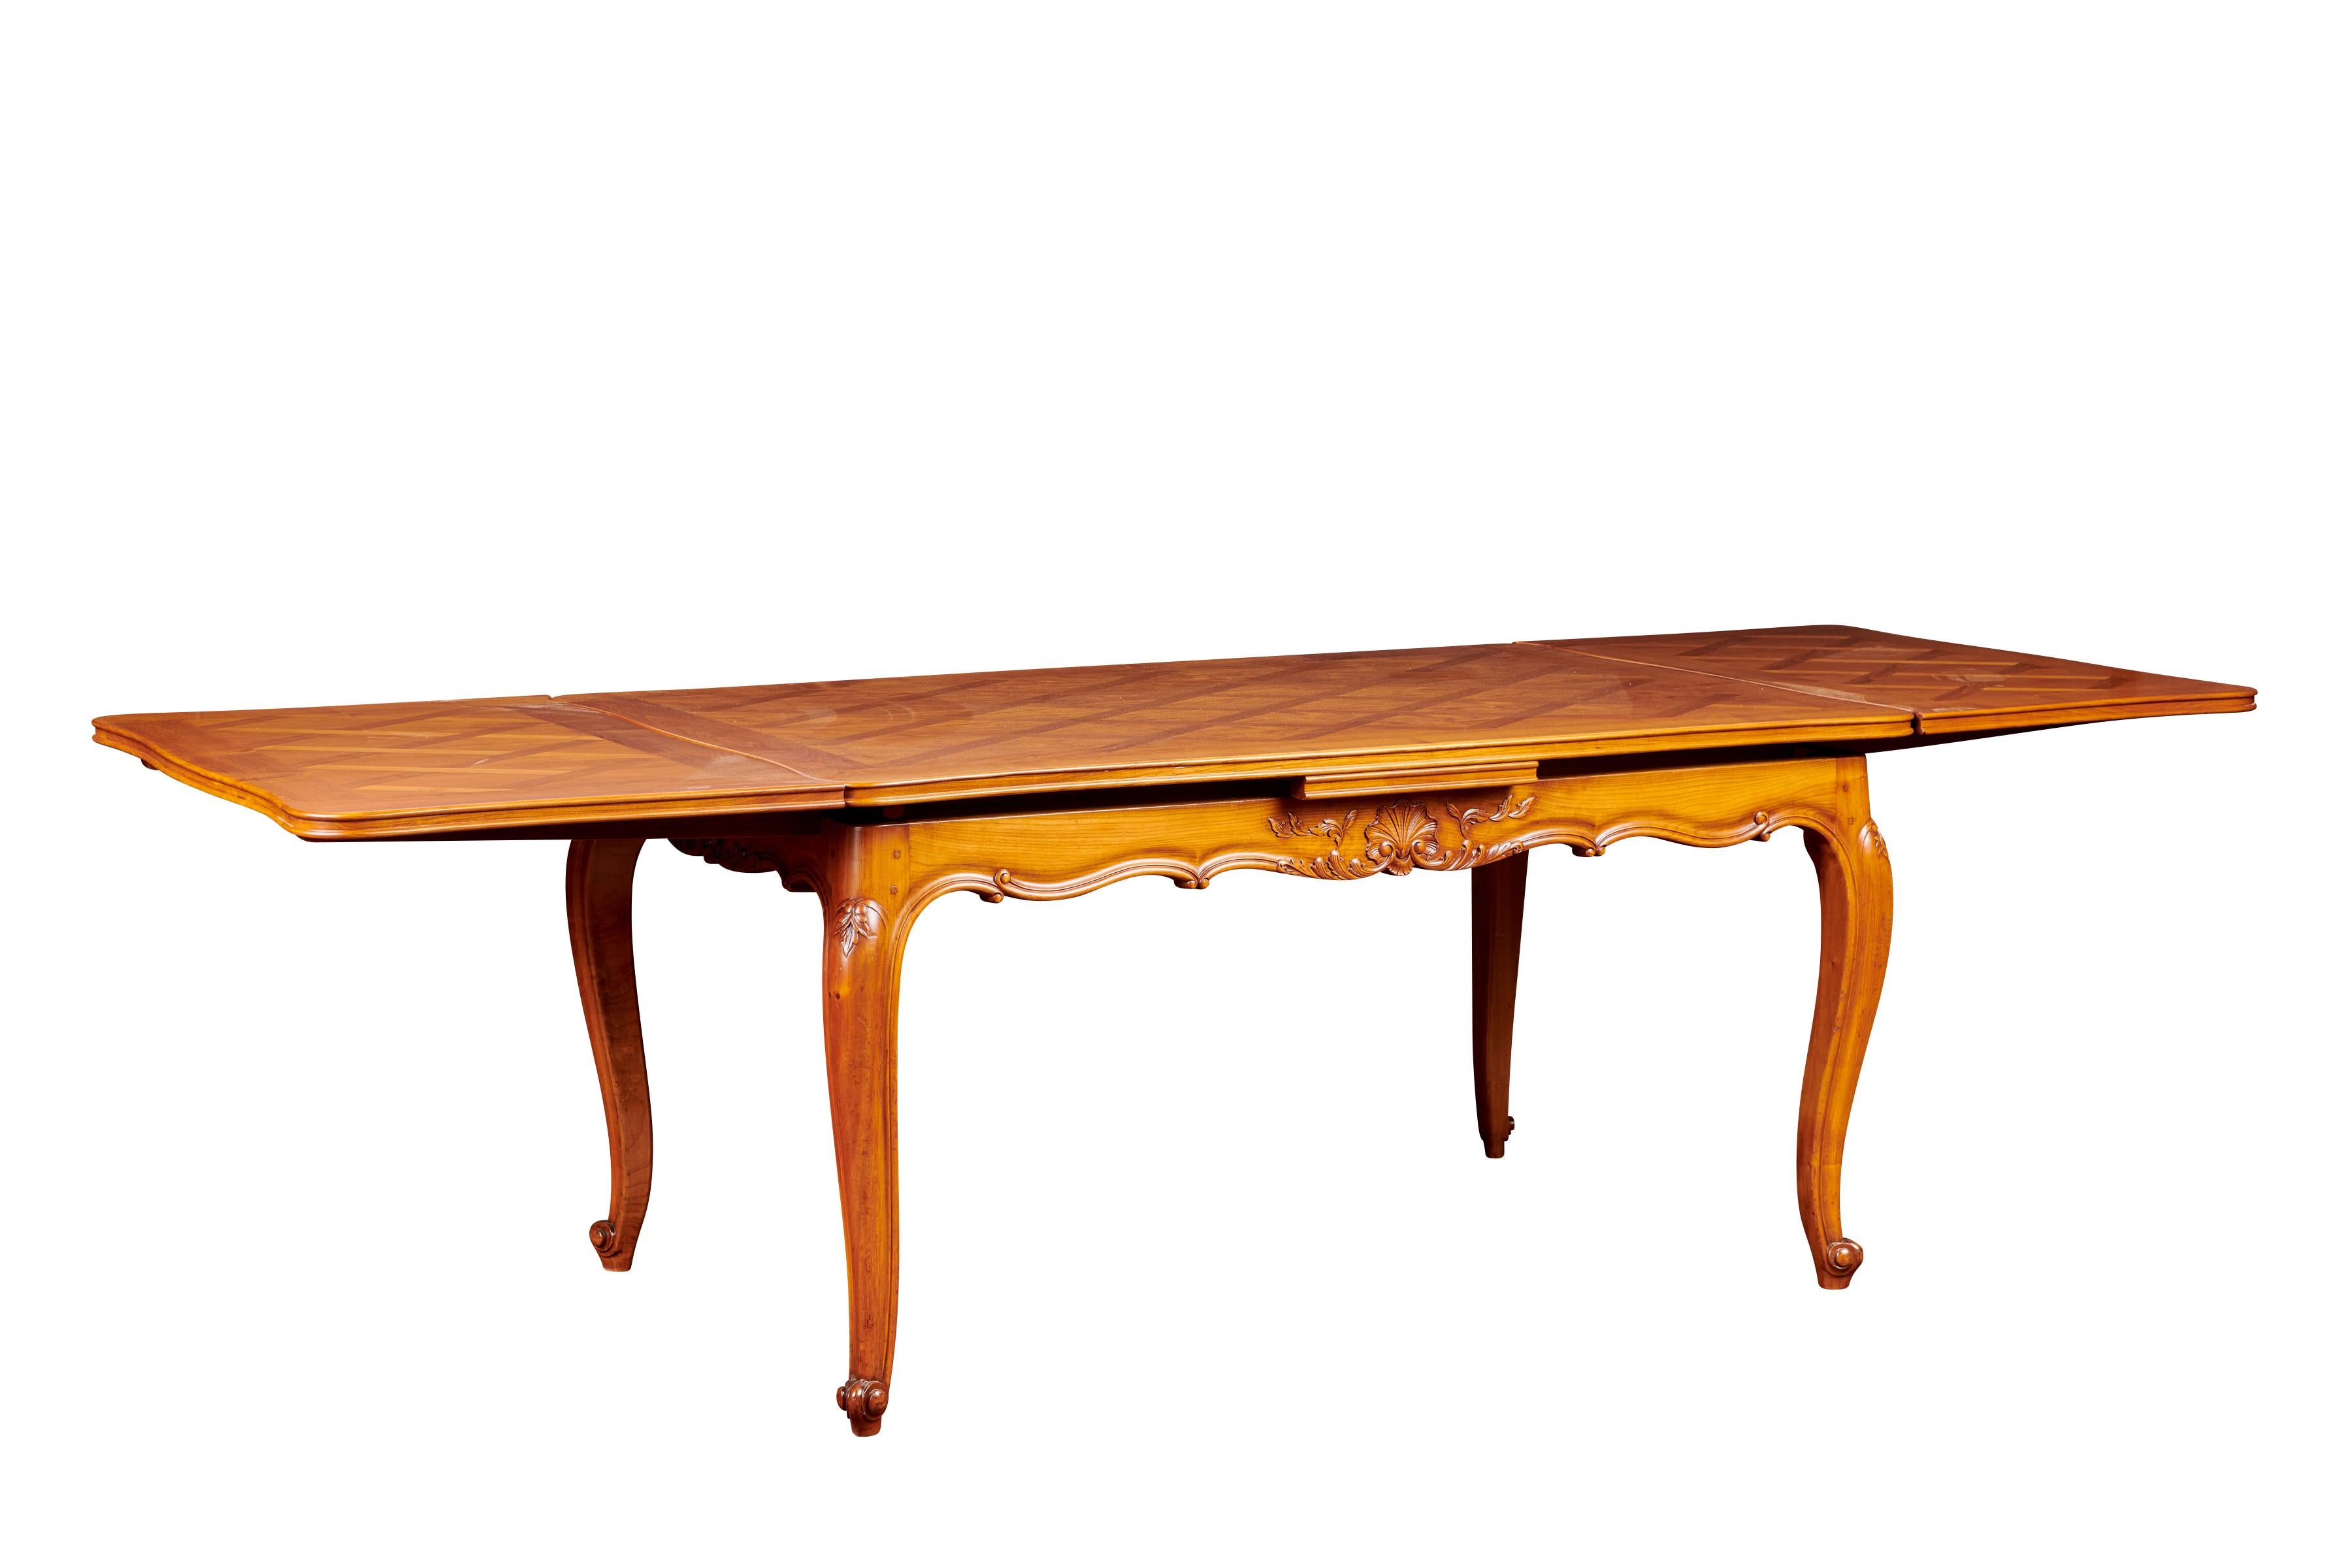 In true Louis XV style, this perfect extendable French dining table has been dated at mid-20th century and has been carved out of cherrywood. Featuring fleur carvings and adornments to the tables’ sides and cabriole legs, the top of this table